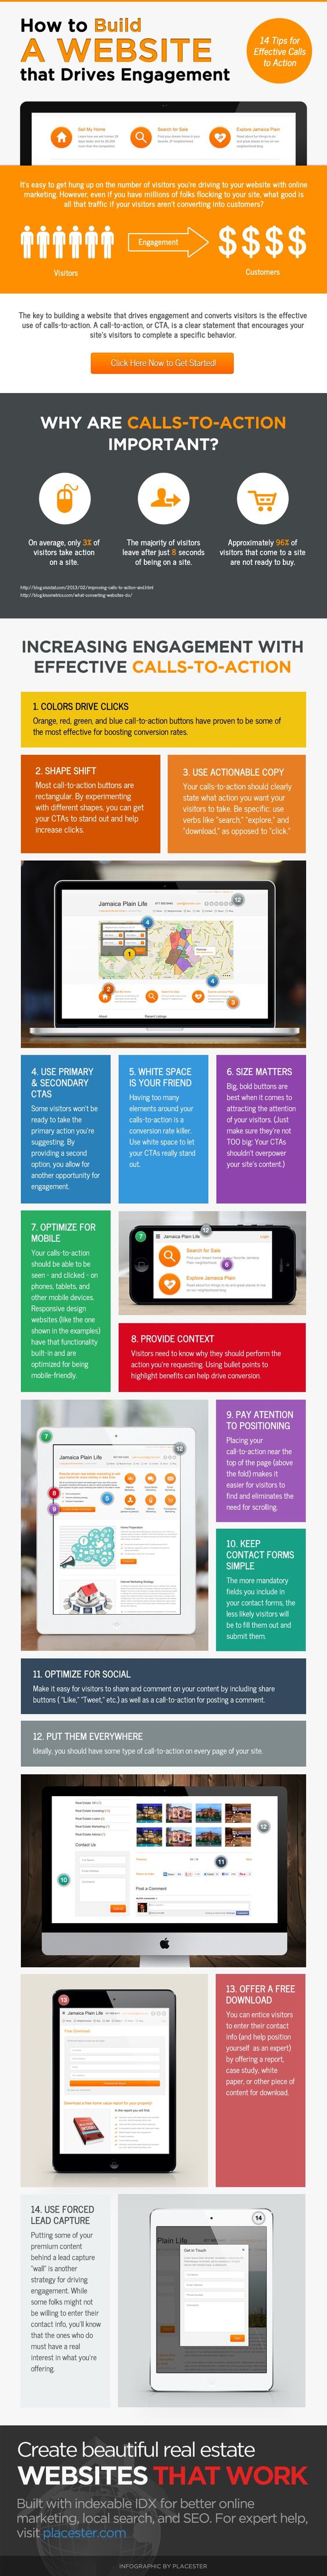 Creating Website Calls-to-Action That Build Your Real Estate Business [Infographic] | Inman News